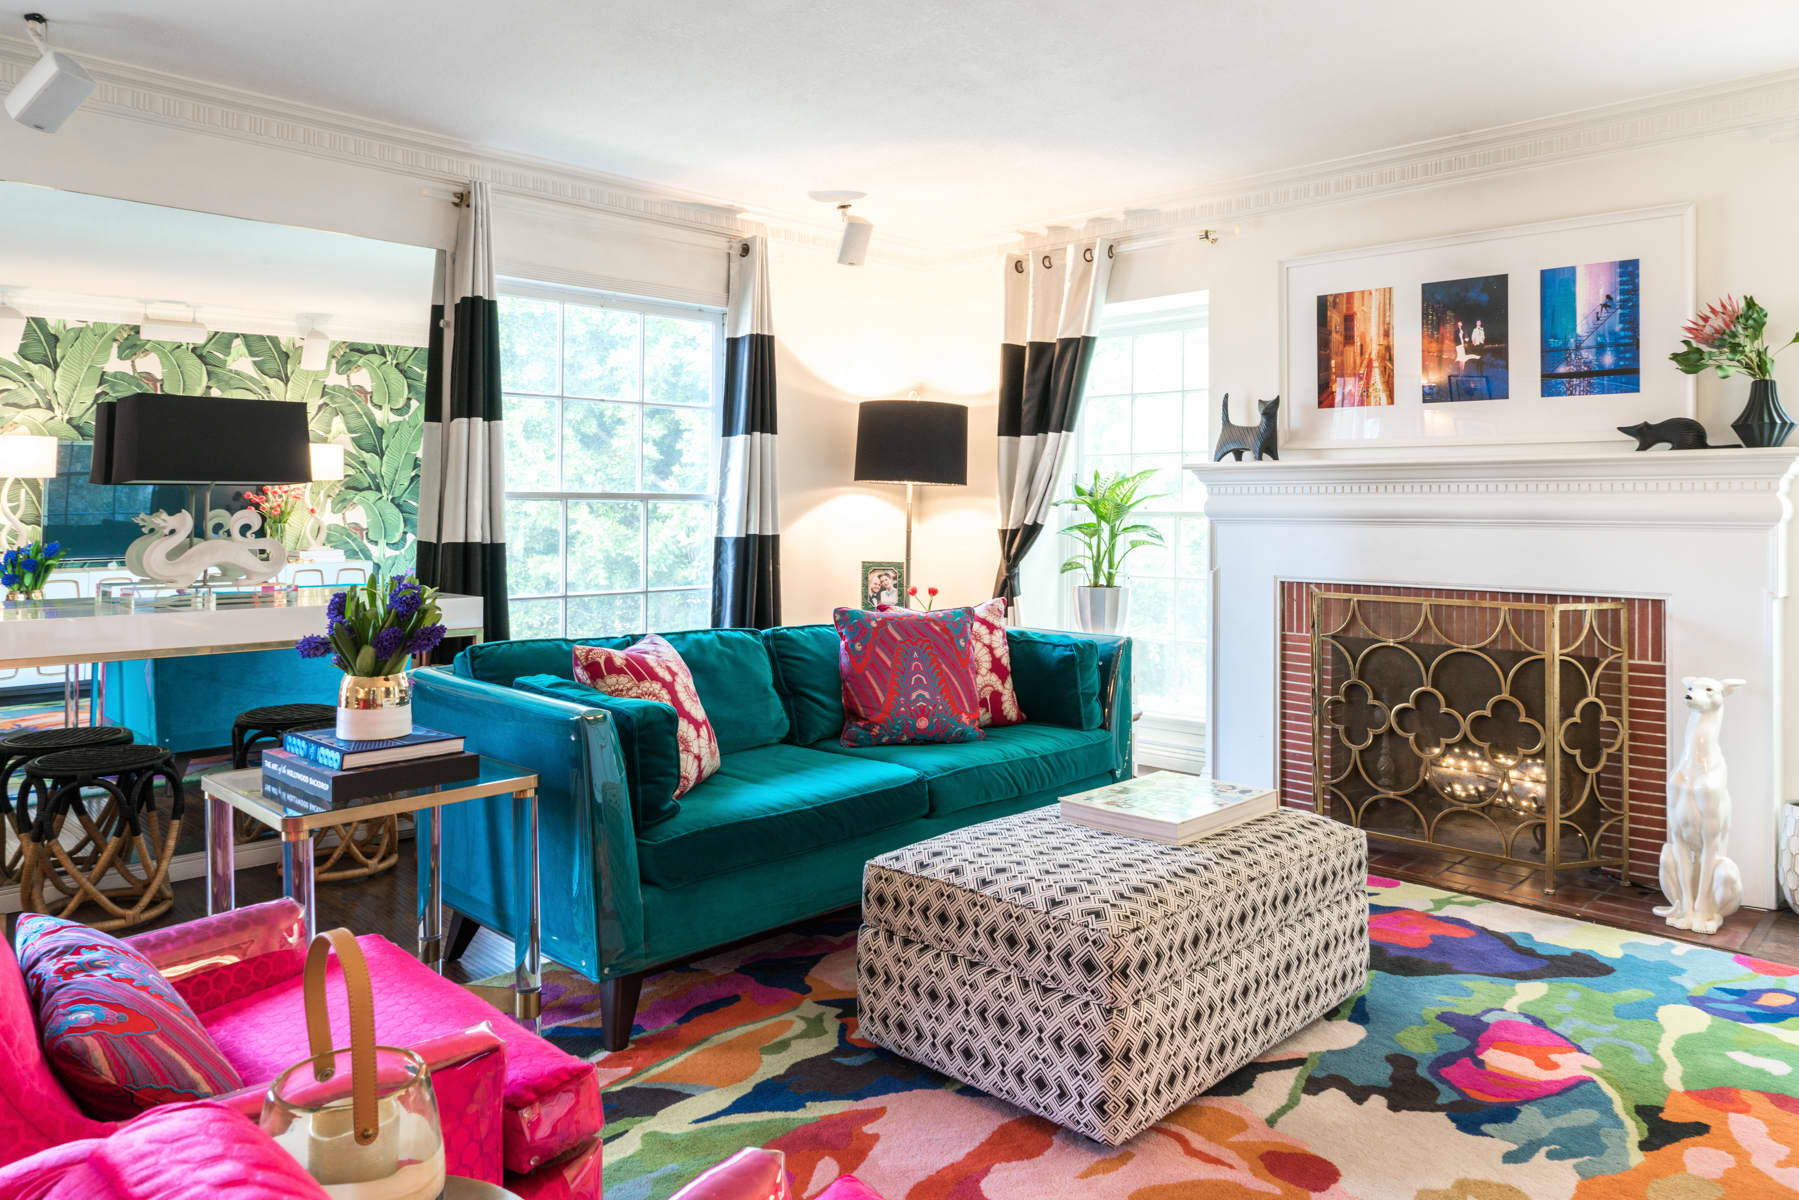 Los Angeles House Tour: A Colorful, Patterned Rental ...